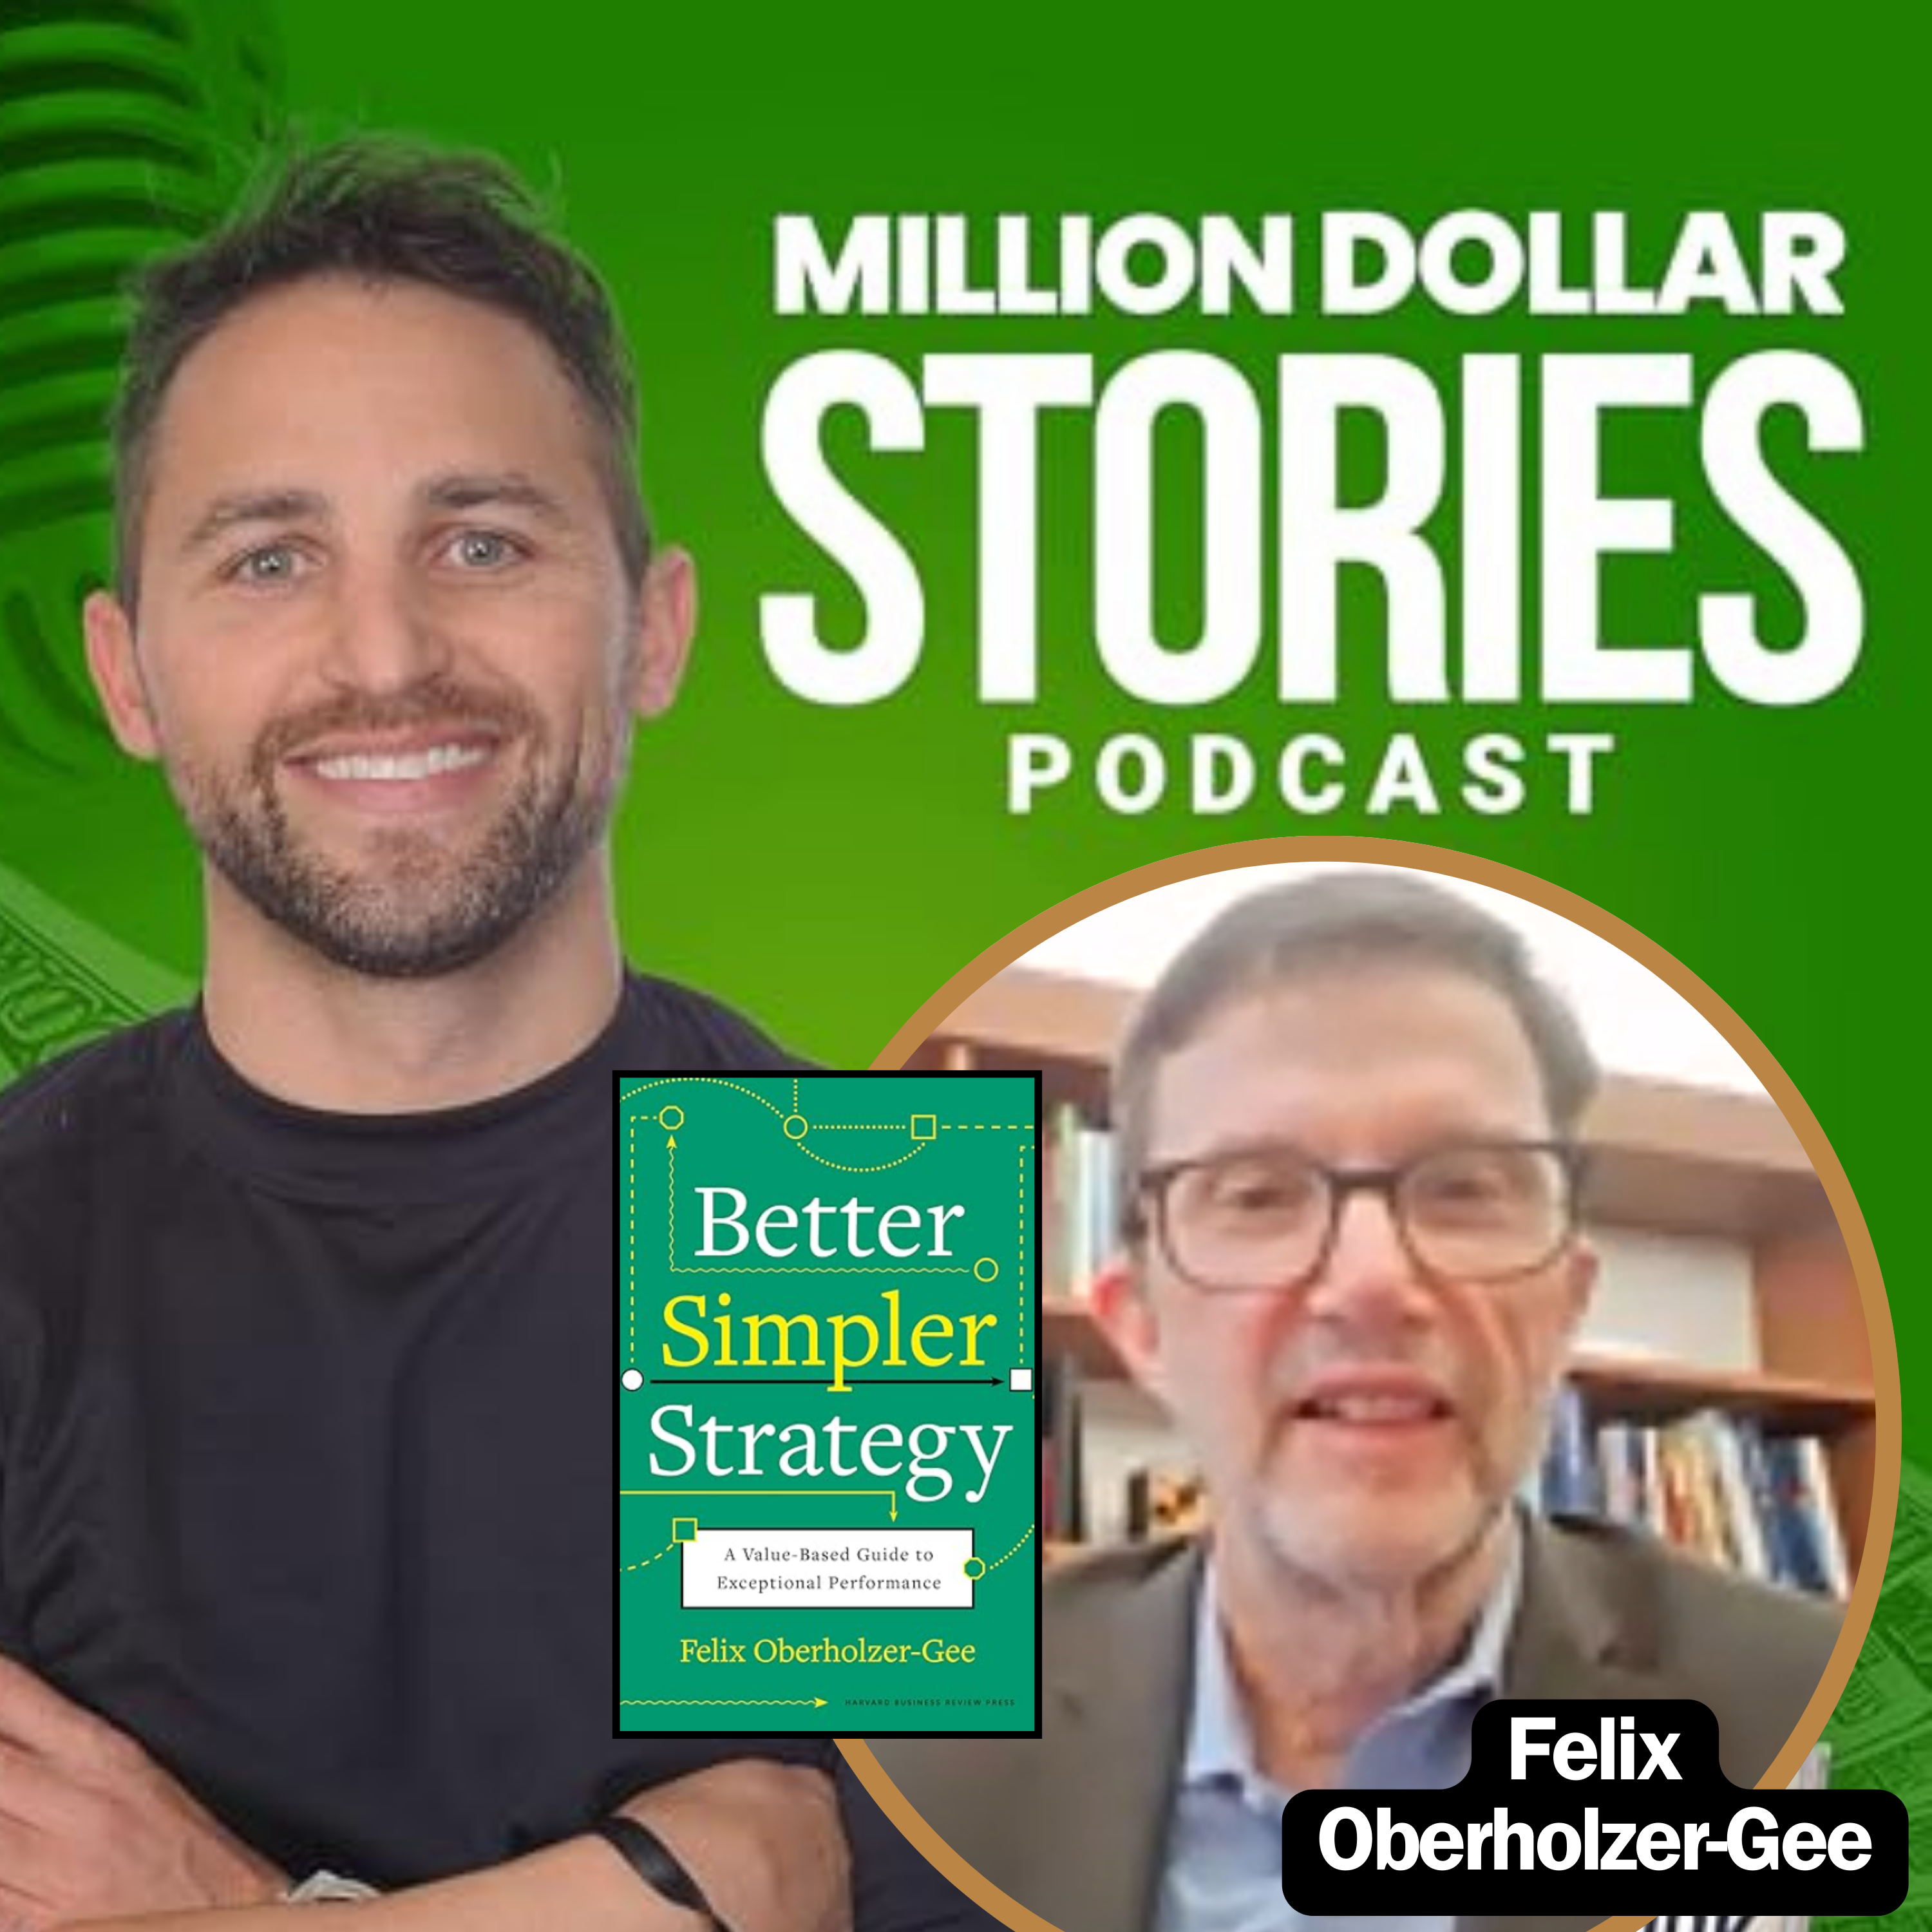 Felix Oberholzer-Gee-Author of “Better, Simpler Strategy: A Value-Based Guide to Exceptional Performance”